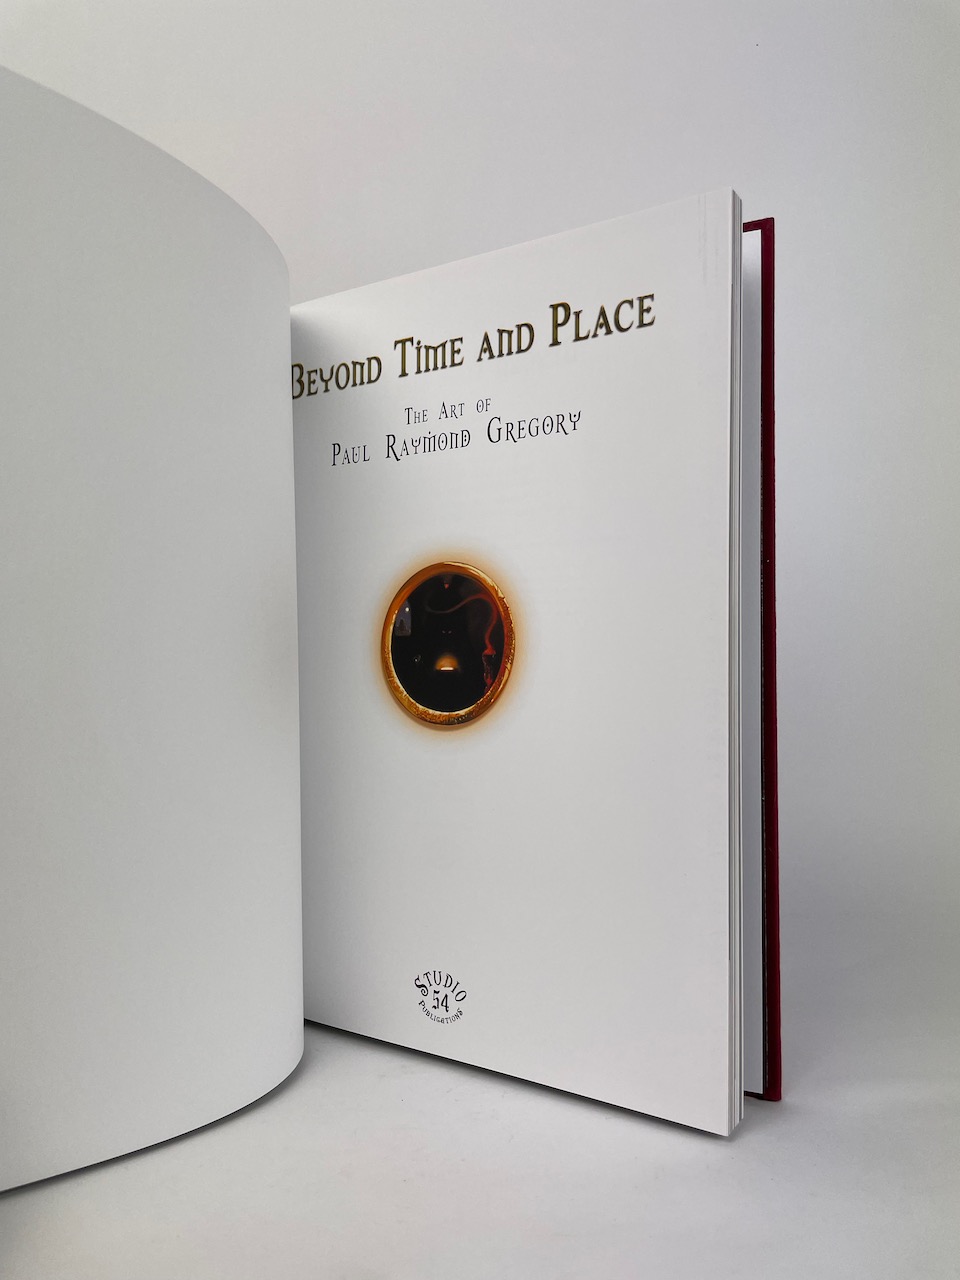 Beyond Time and Place The Art of Paul Raymond Gregory - Limited Edition Book 11